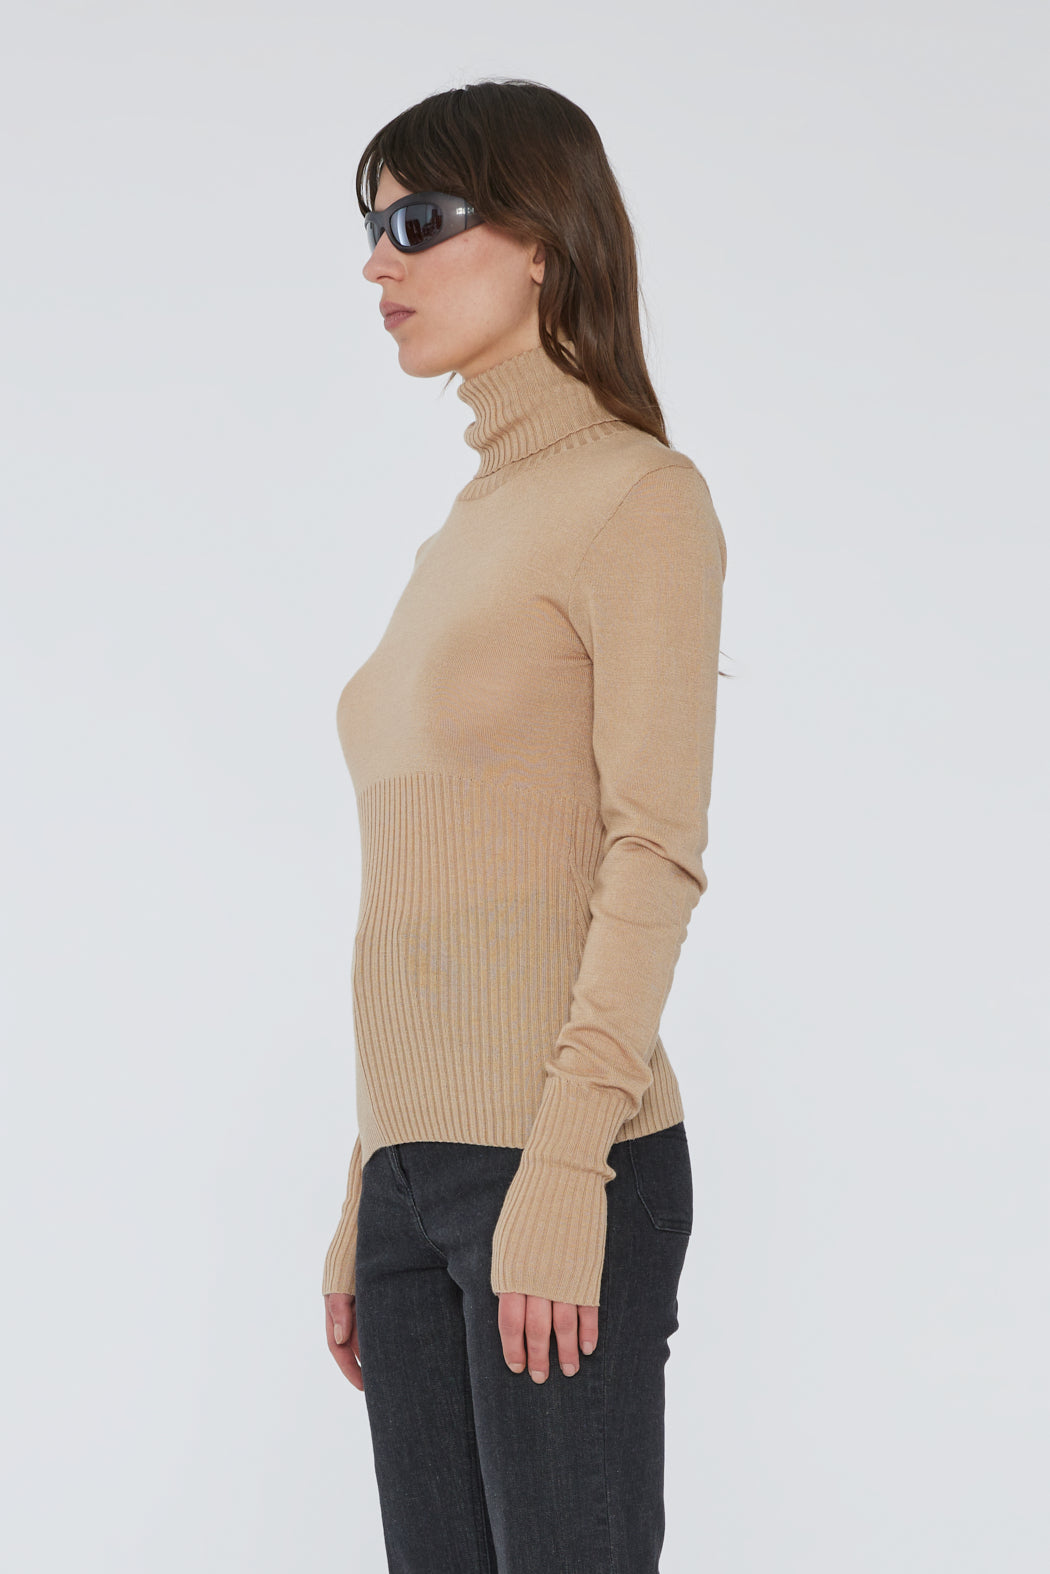 Remain Sheer Knit Sweater